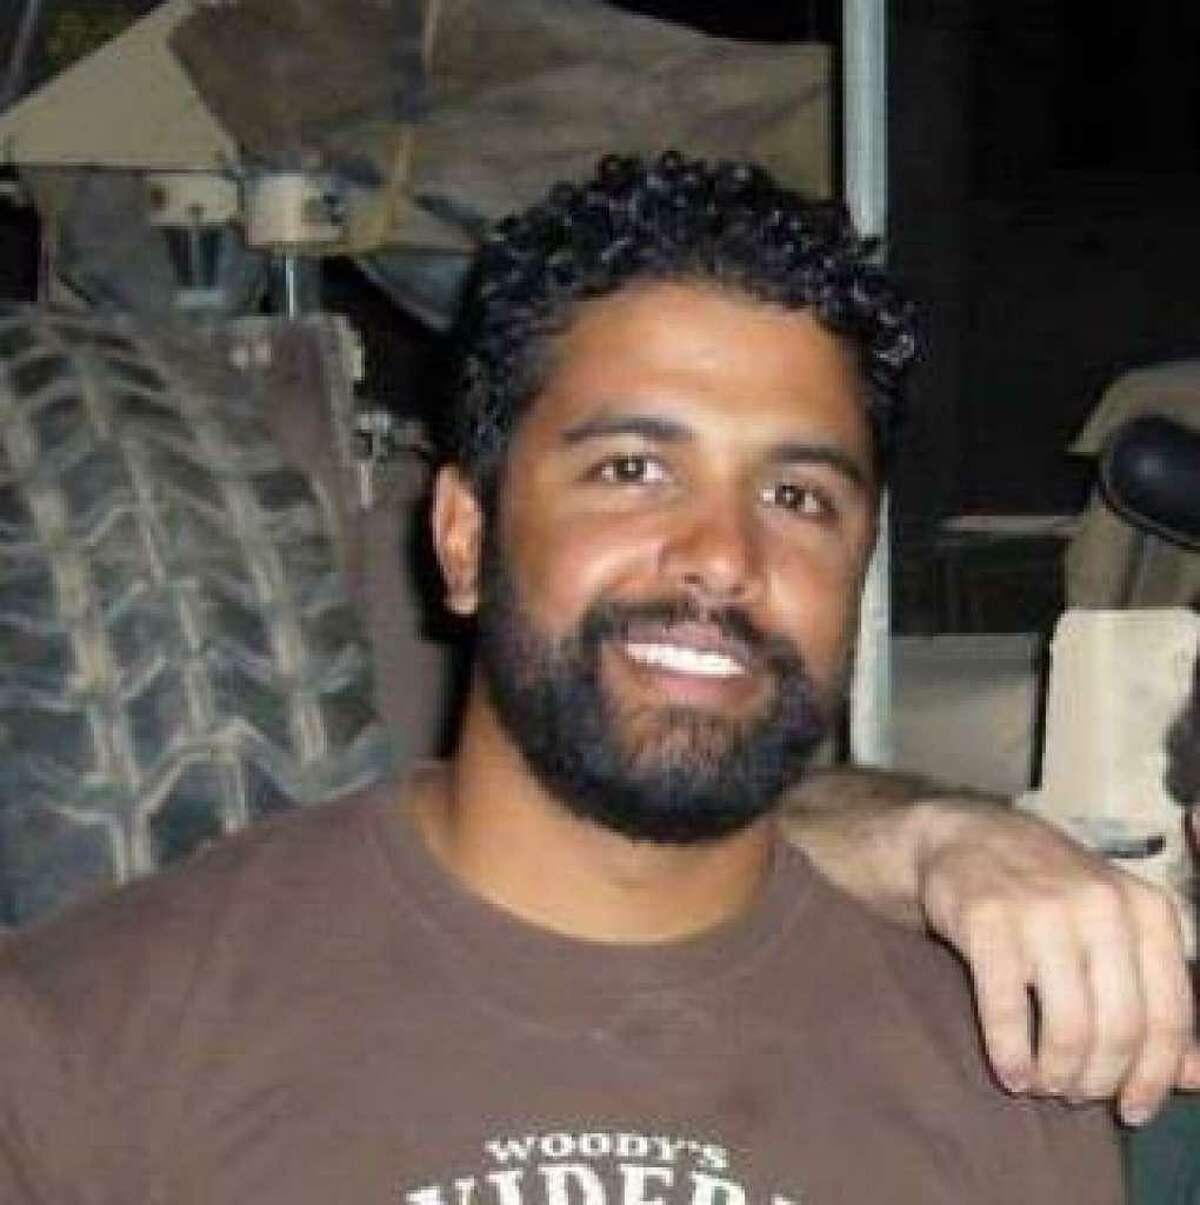 Richard Concepcion, 37, was in the process of retiring from the special forces, when police said he shot his estranged wife. He is pictured here on one of his many deployments to Afghanistan, according to family.